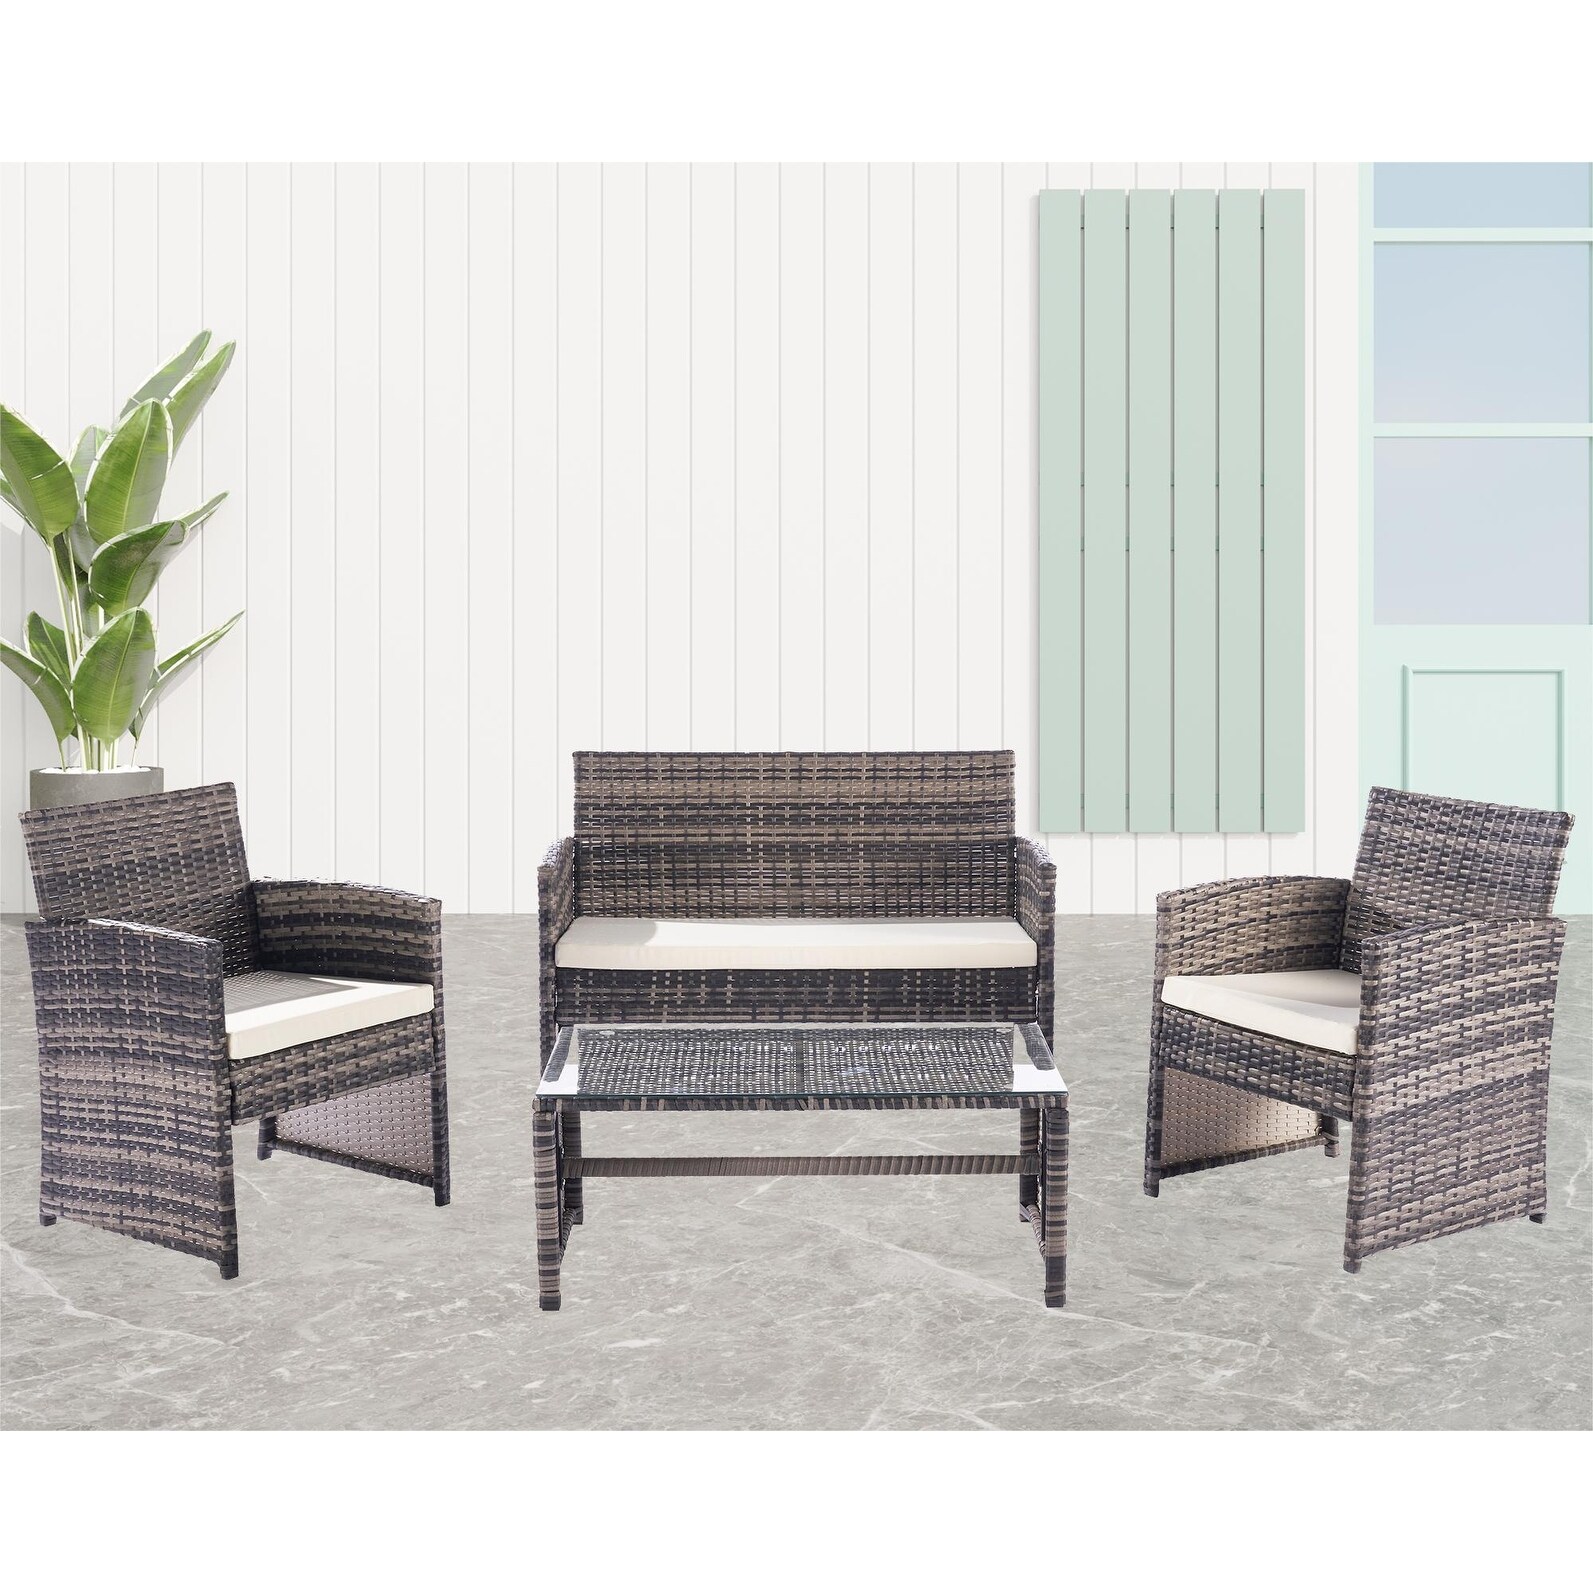 4 Piece Modular Outdoor Rattan Sofa And Table Set With All-weather Wicker